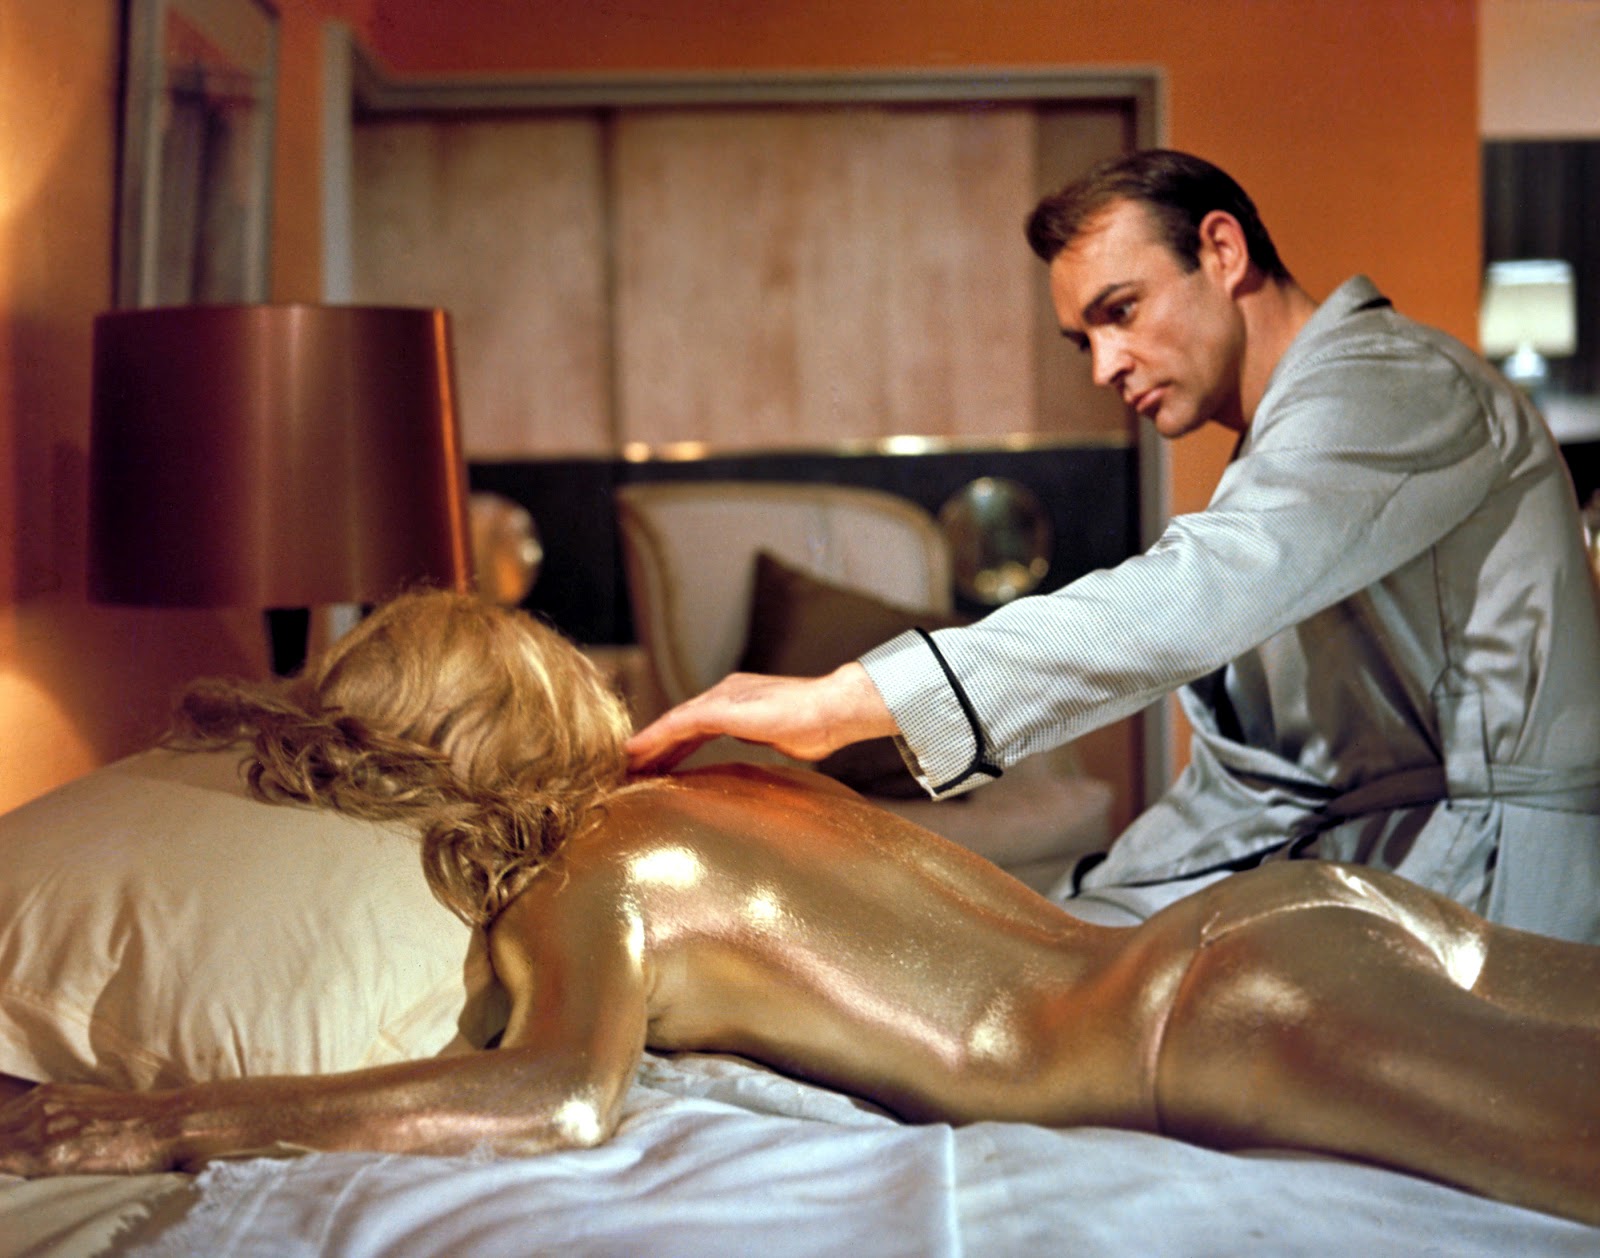 James Bond (Sean Connery) examines the body Jill Masterson (Shirley Eaton) after receiving the Goldfinger treatment.